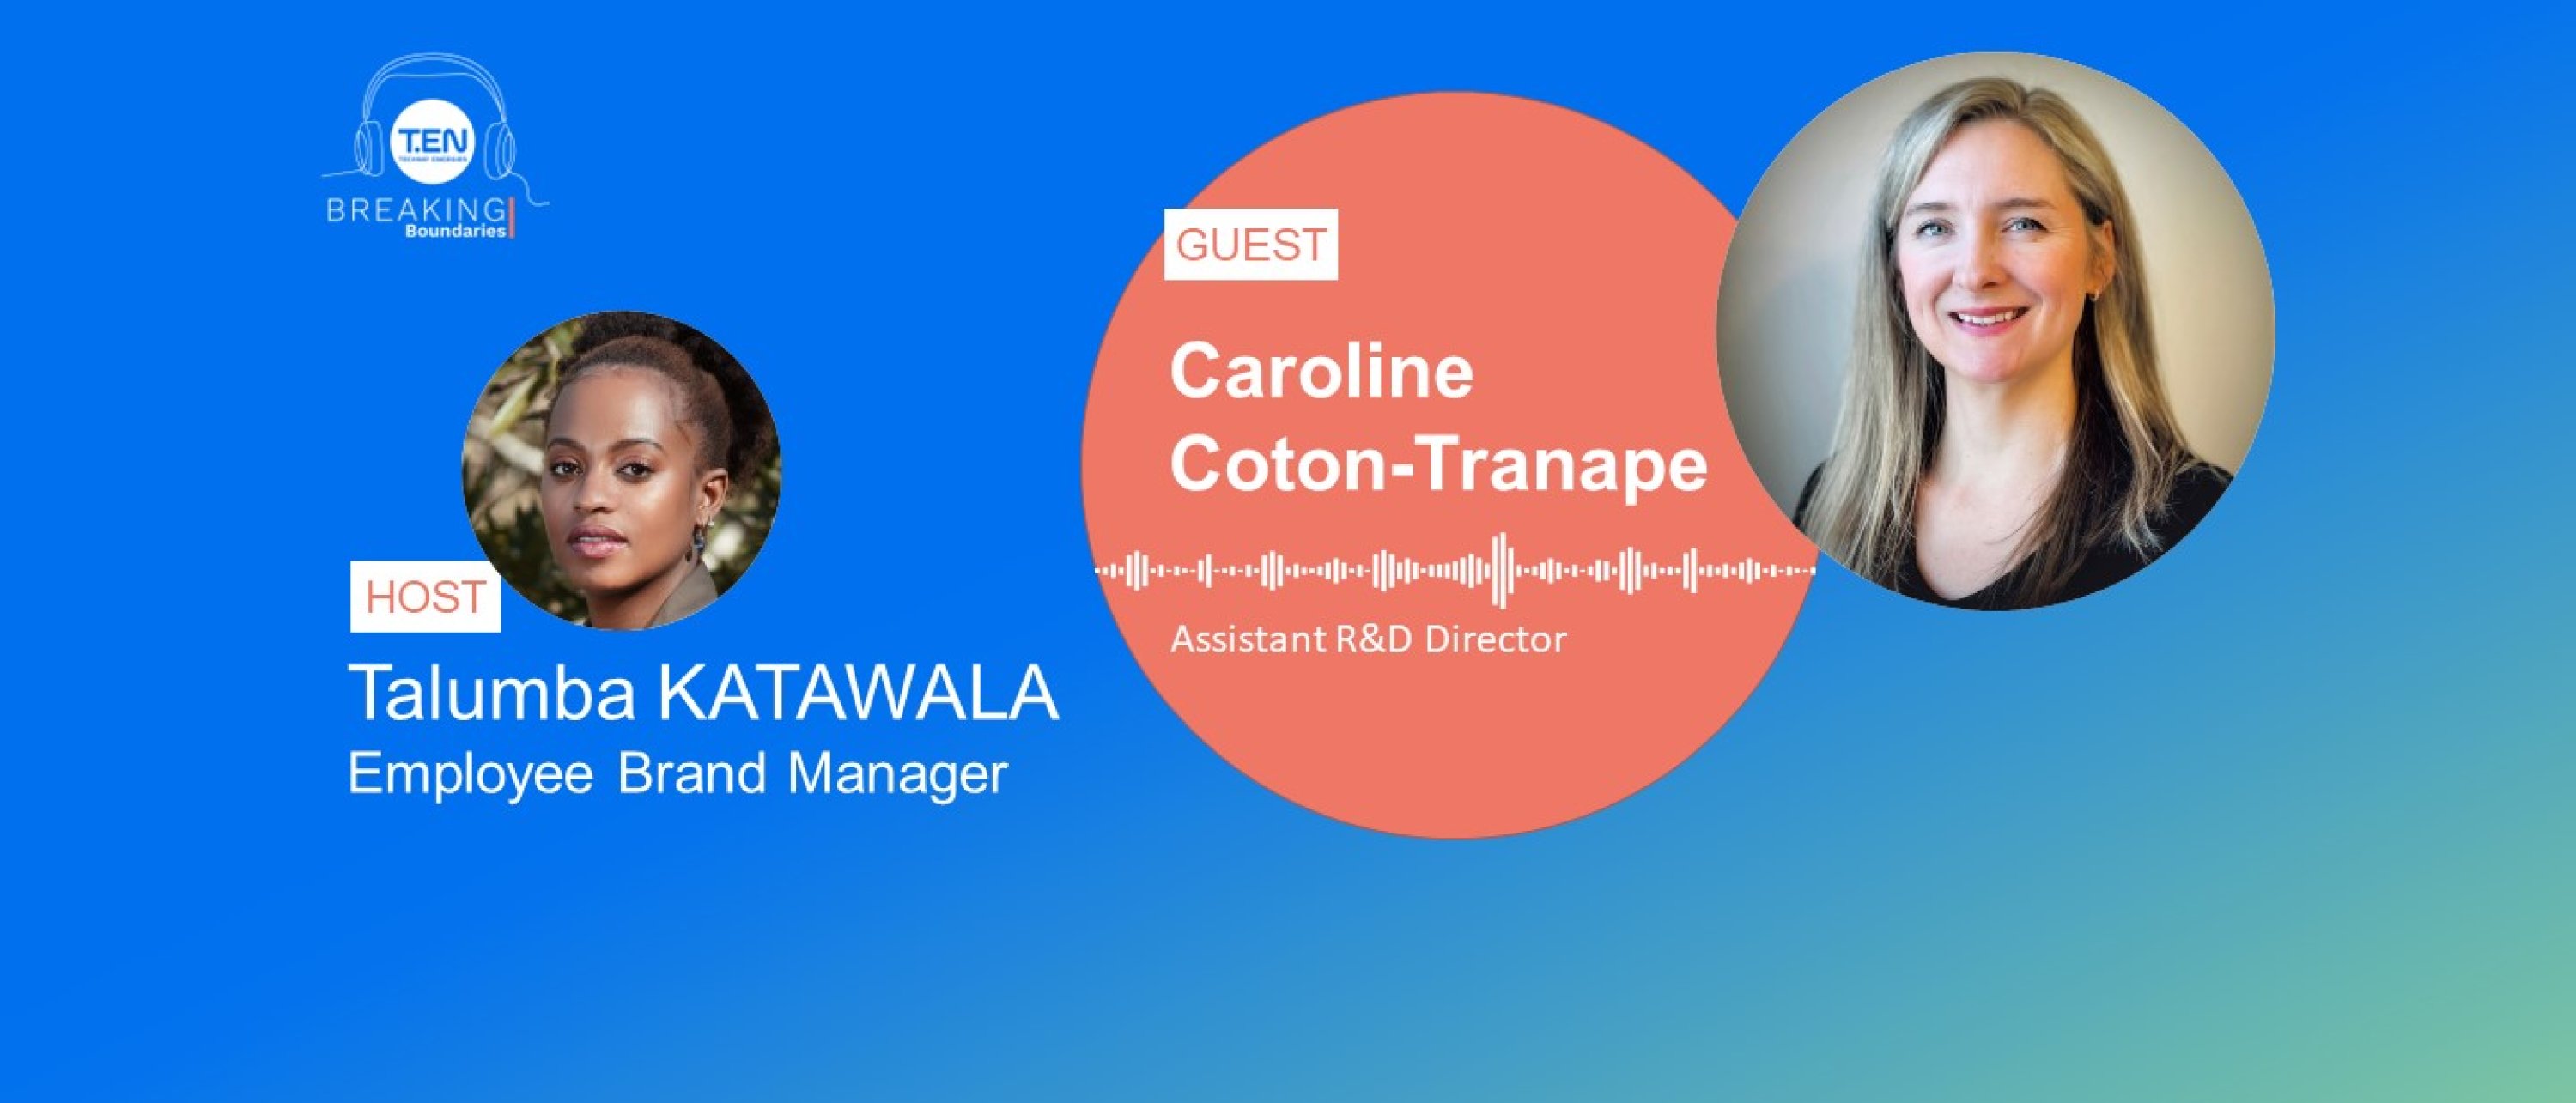 Podcast with Caroline Coton-Tranape of Technip Energies discussing the topic - Reinvent the industry for a more circular economy” 